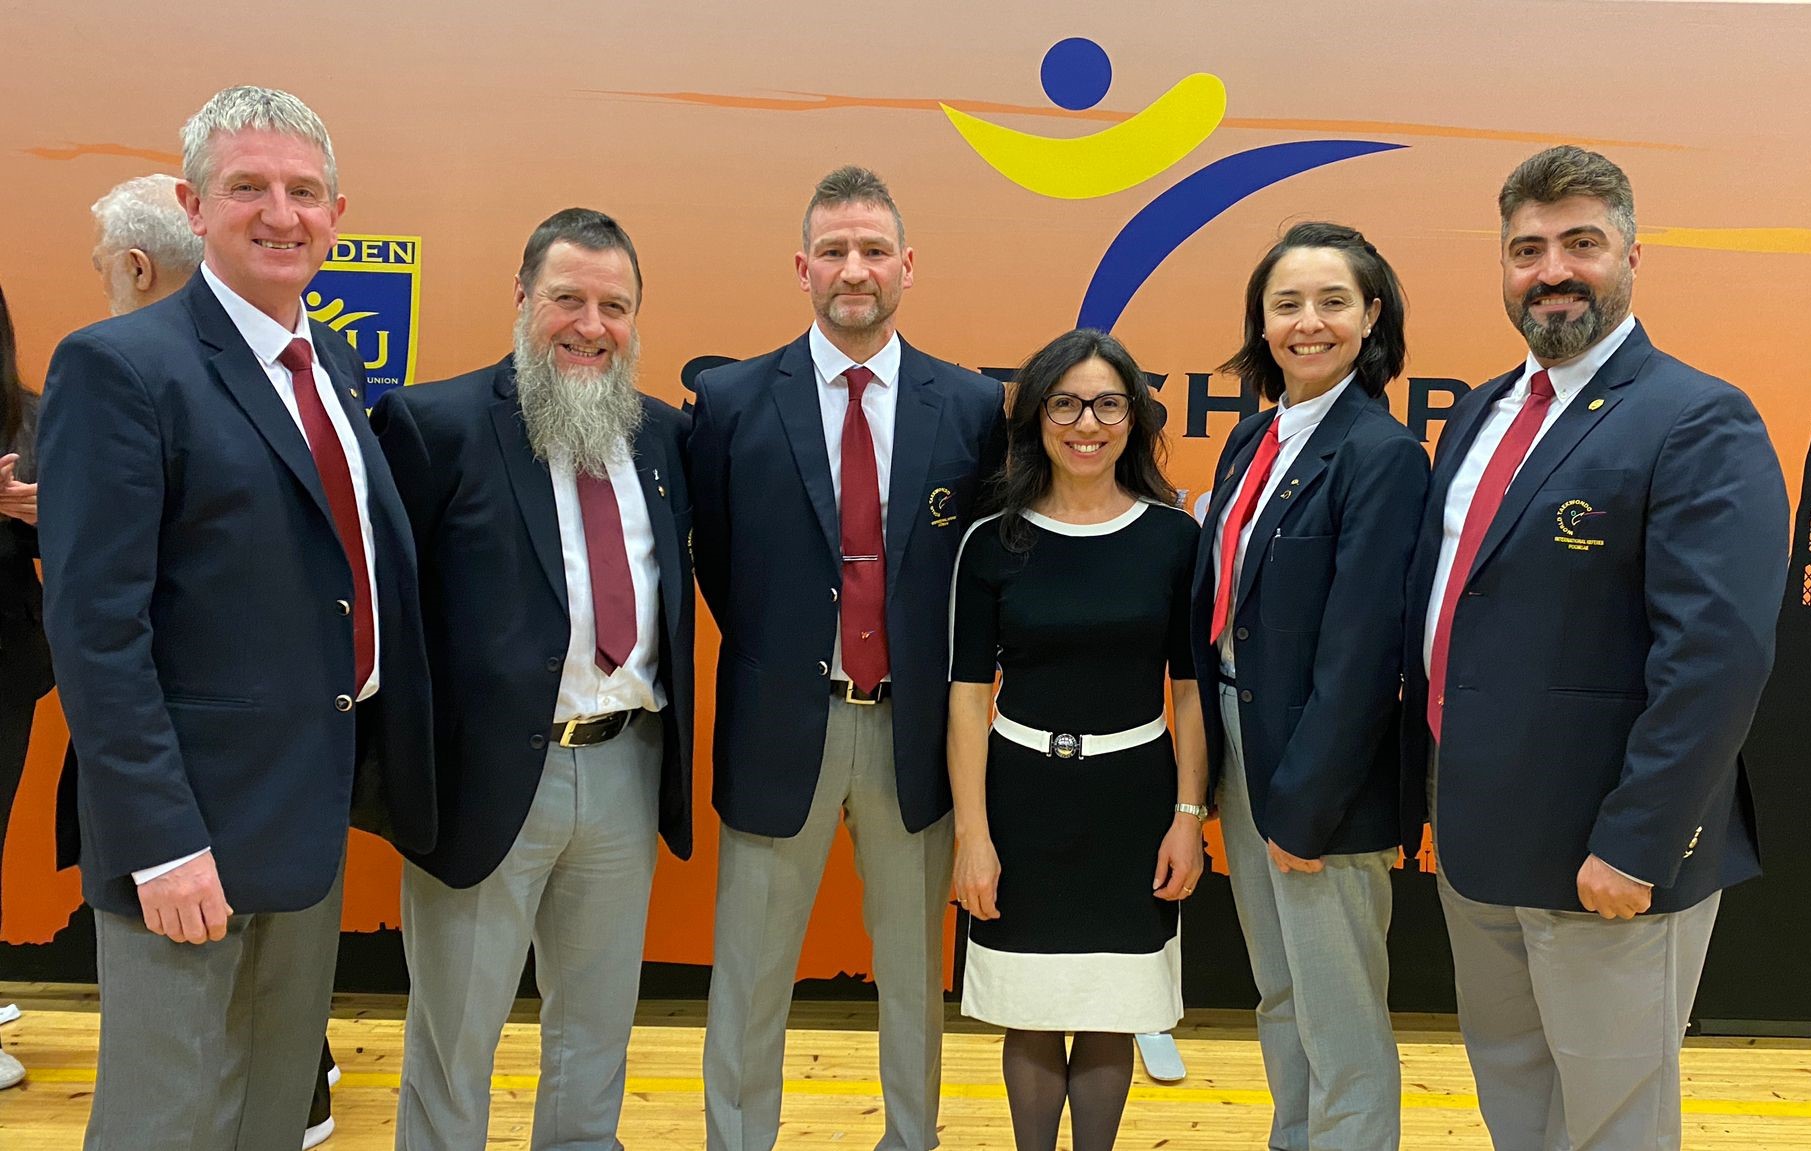 British Taekwondo Officials at the Sweden Open Poomsae in Stockholm